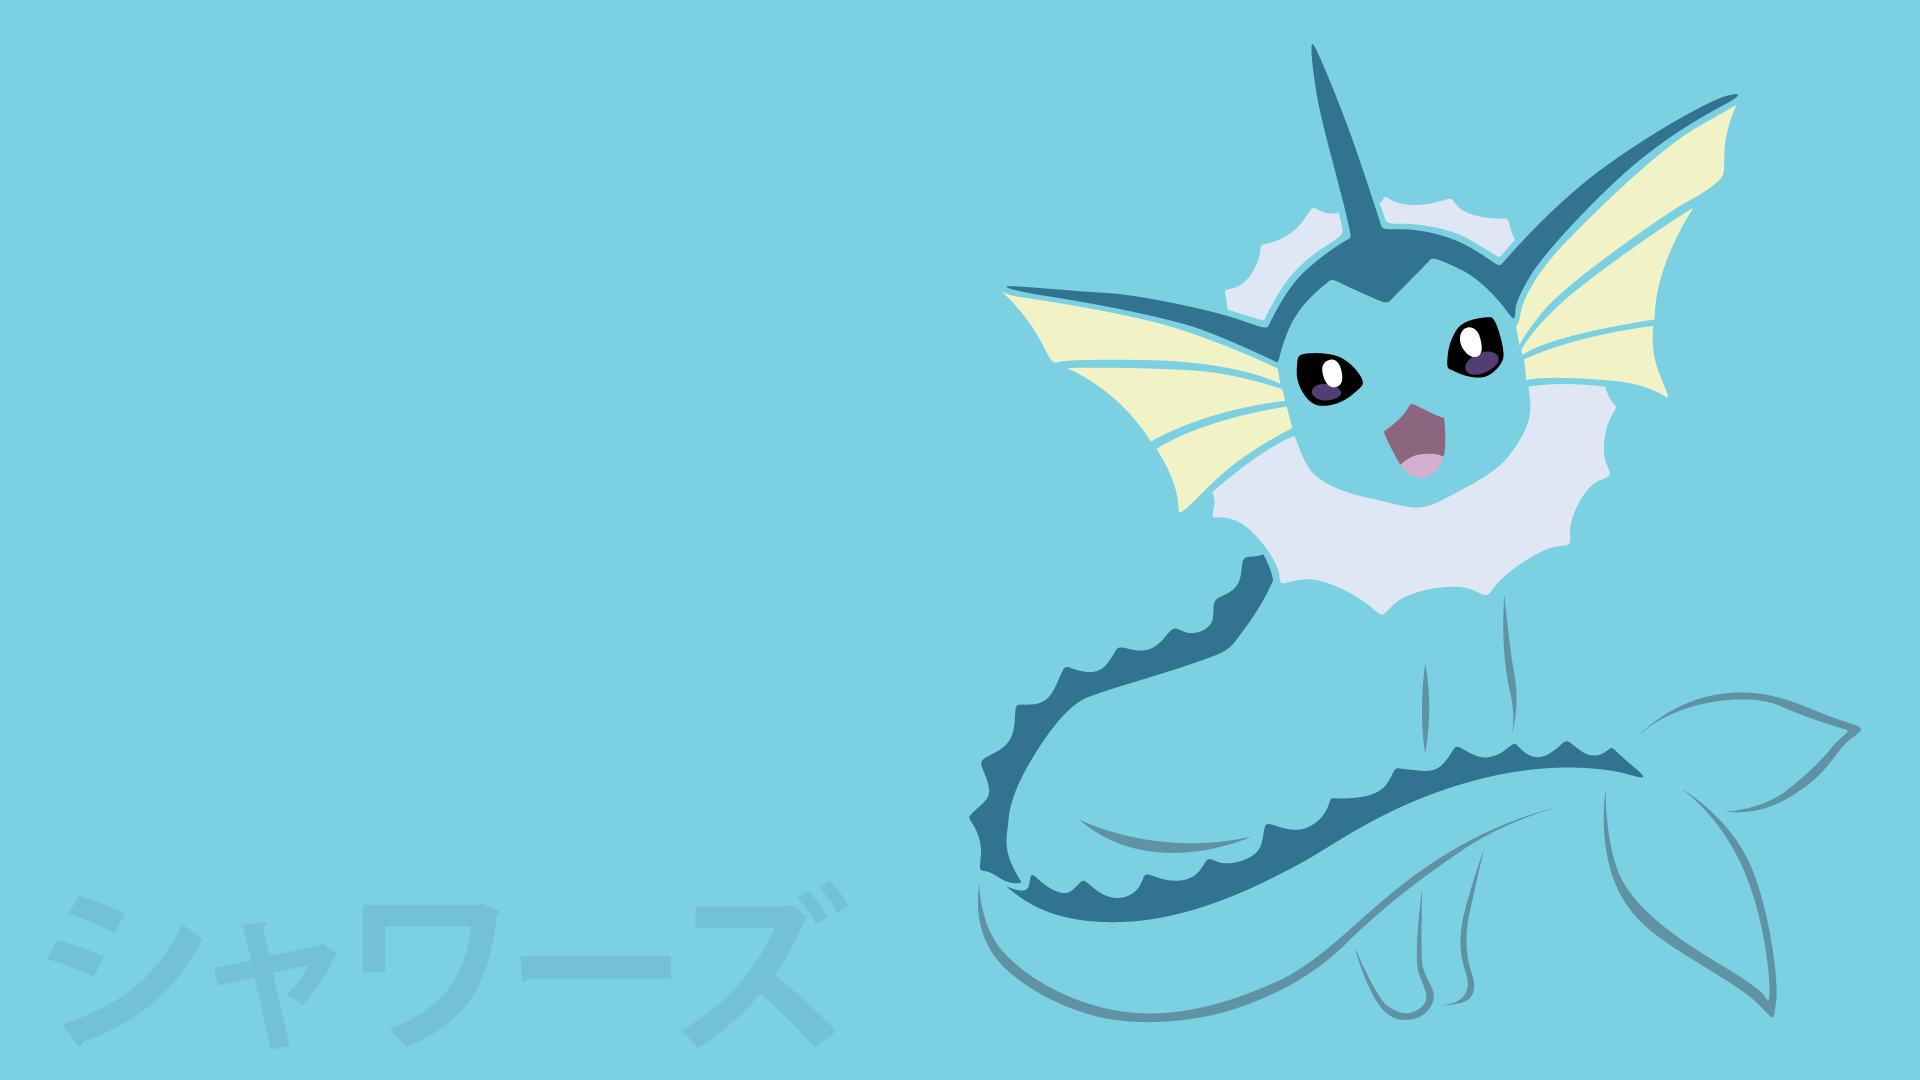 Vaporeon By Dannymybrother